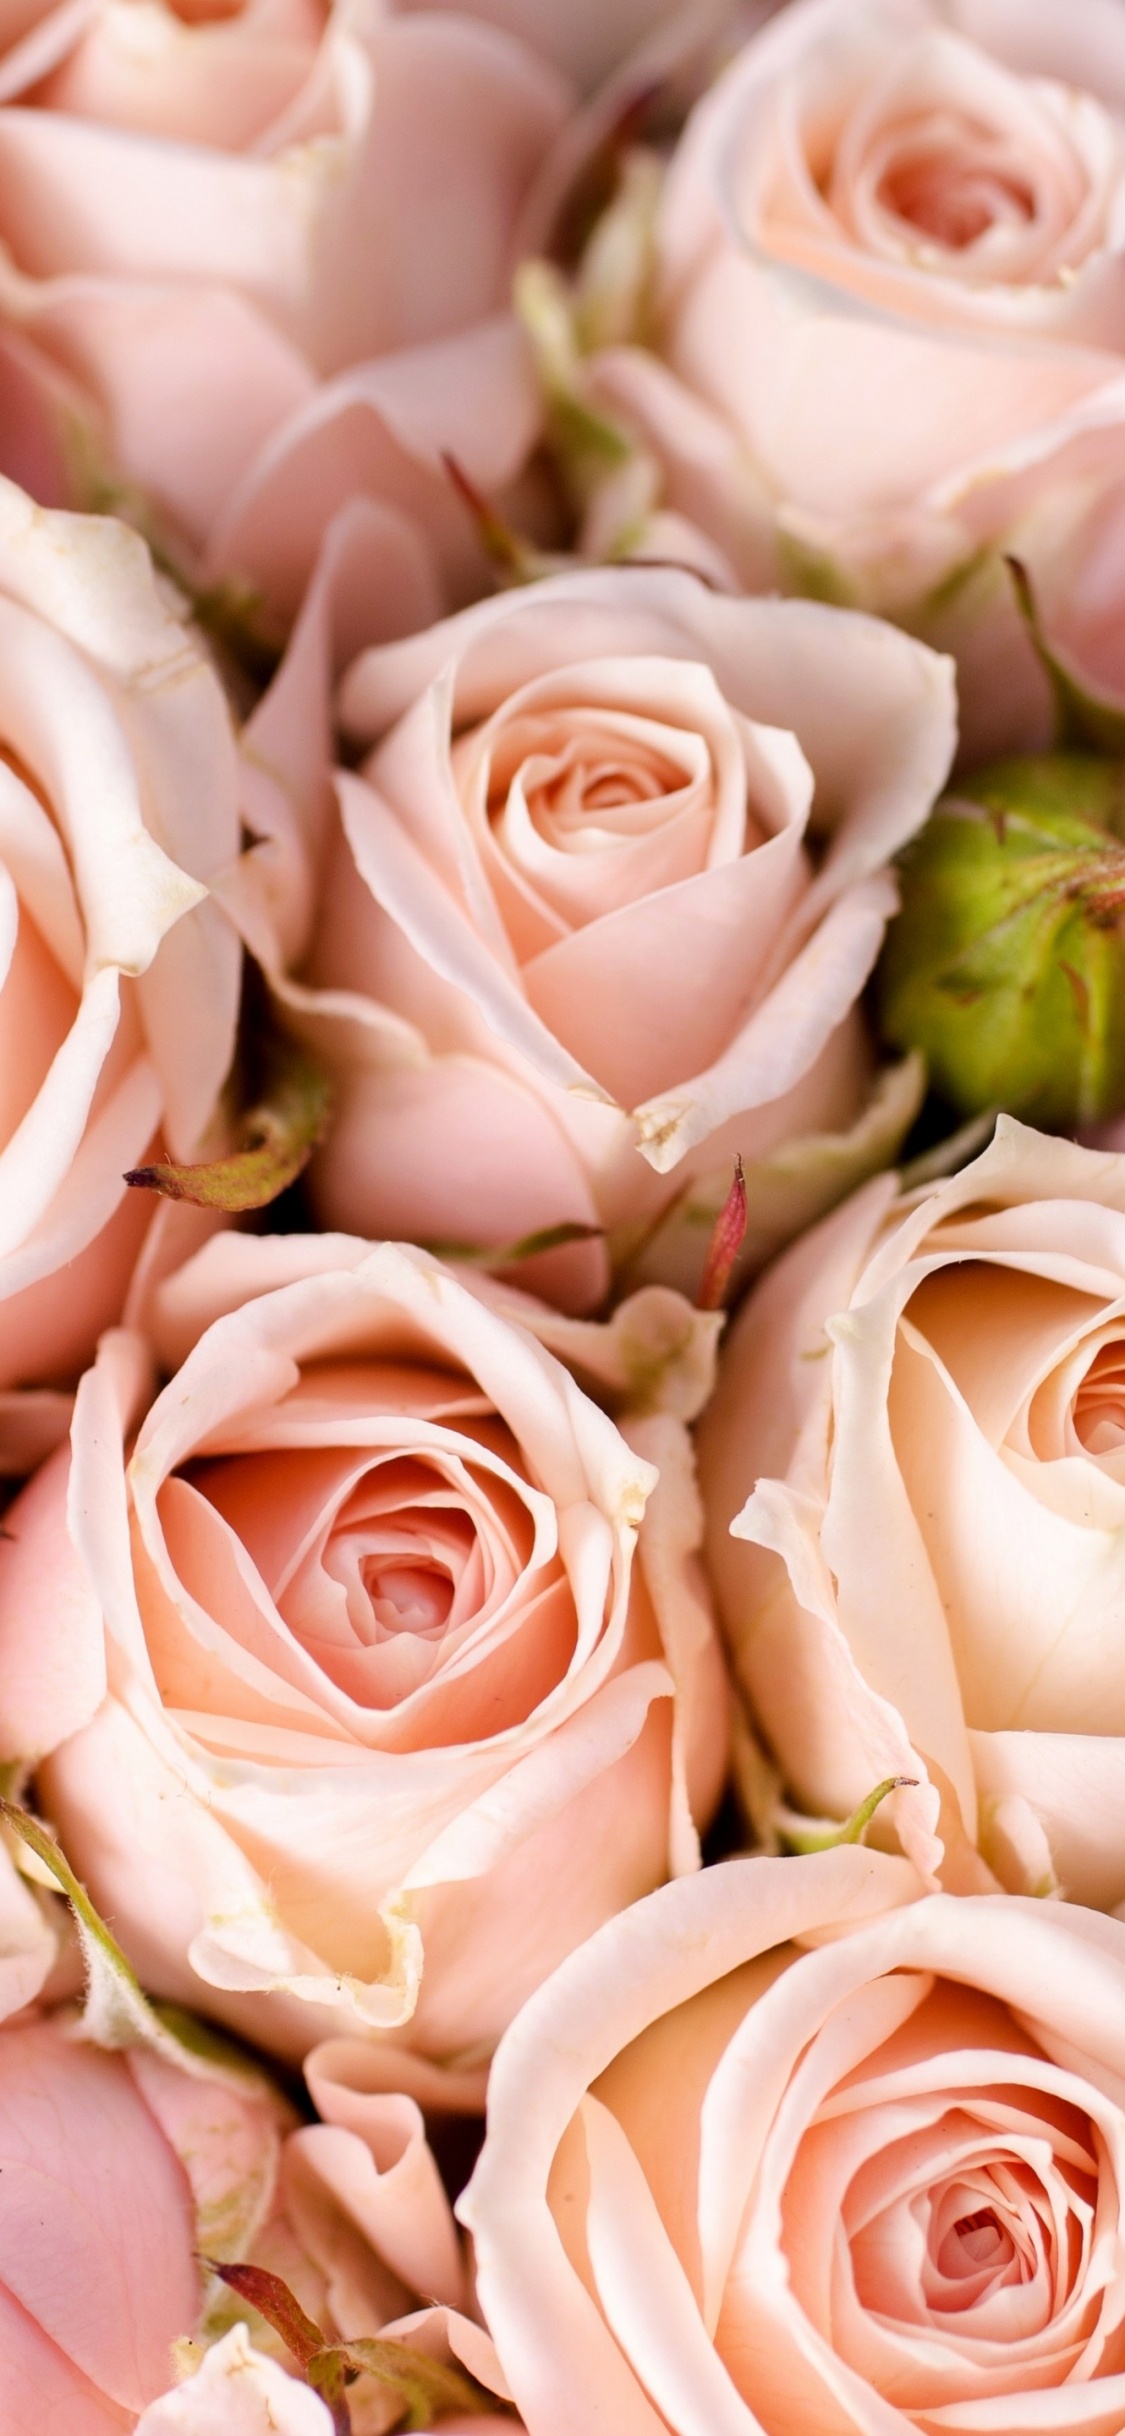 Pink Roses in Close up Photography. Wallpaper in 1125x2436 Resolution